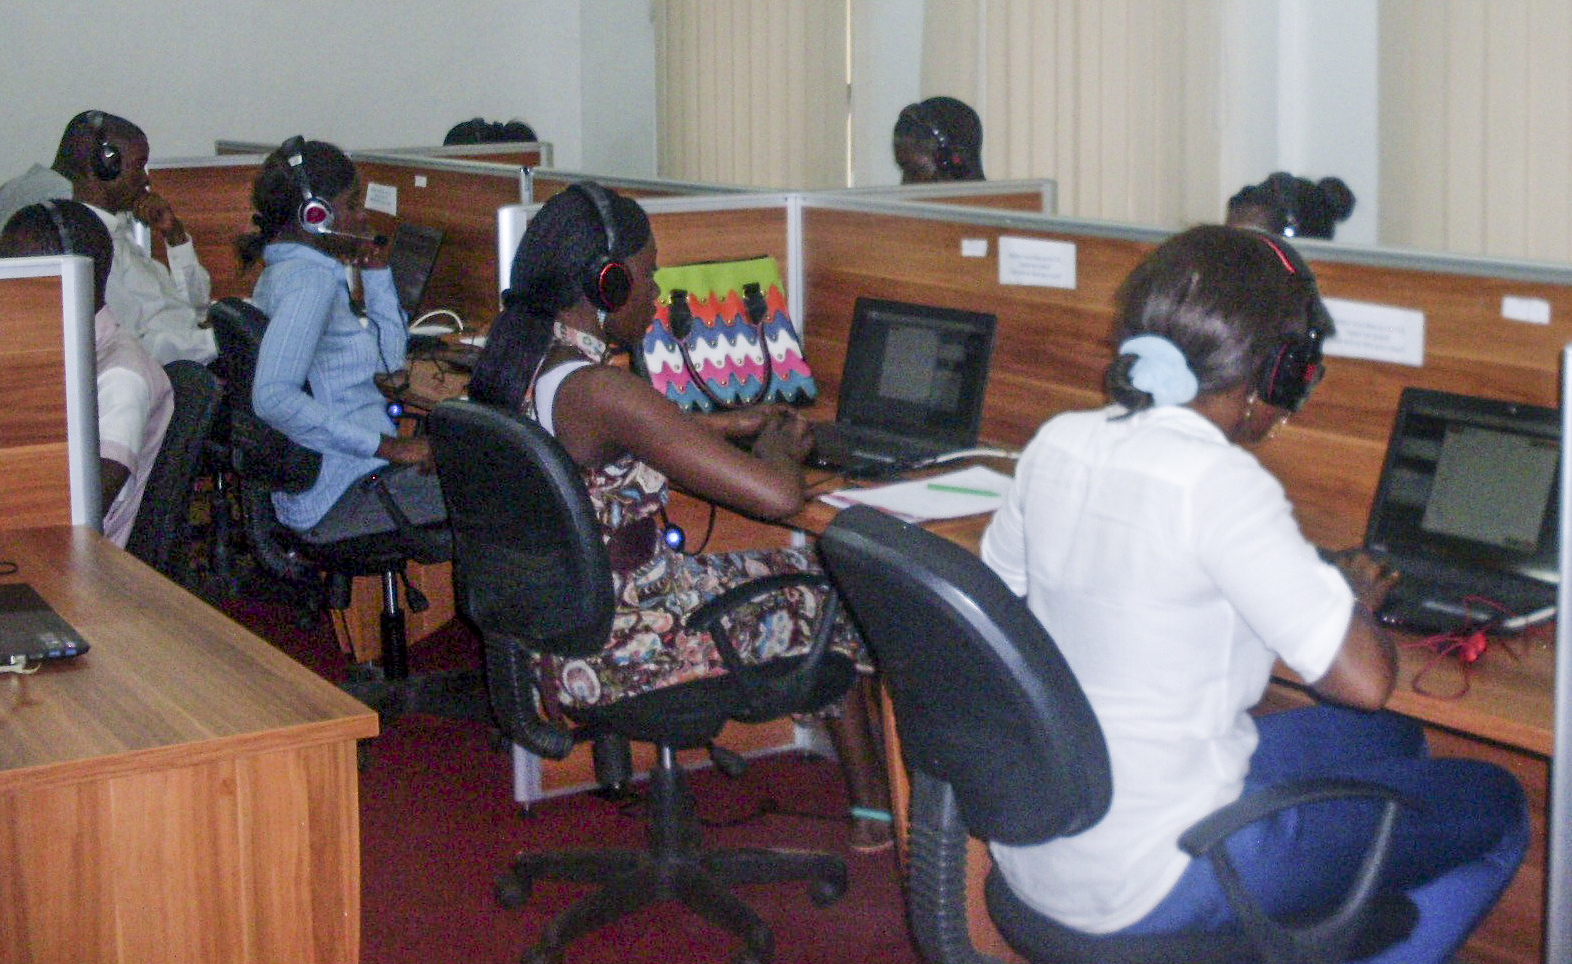 A call center in Guinea’s new emergency operations center in a building being renovated in Conakry recently began operation taking 5,000 calls per day.